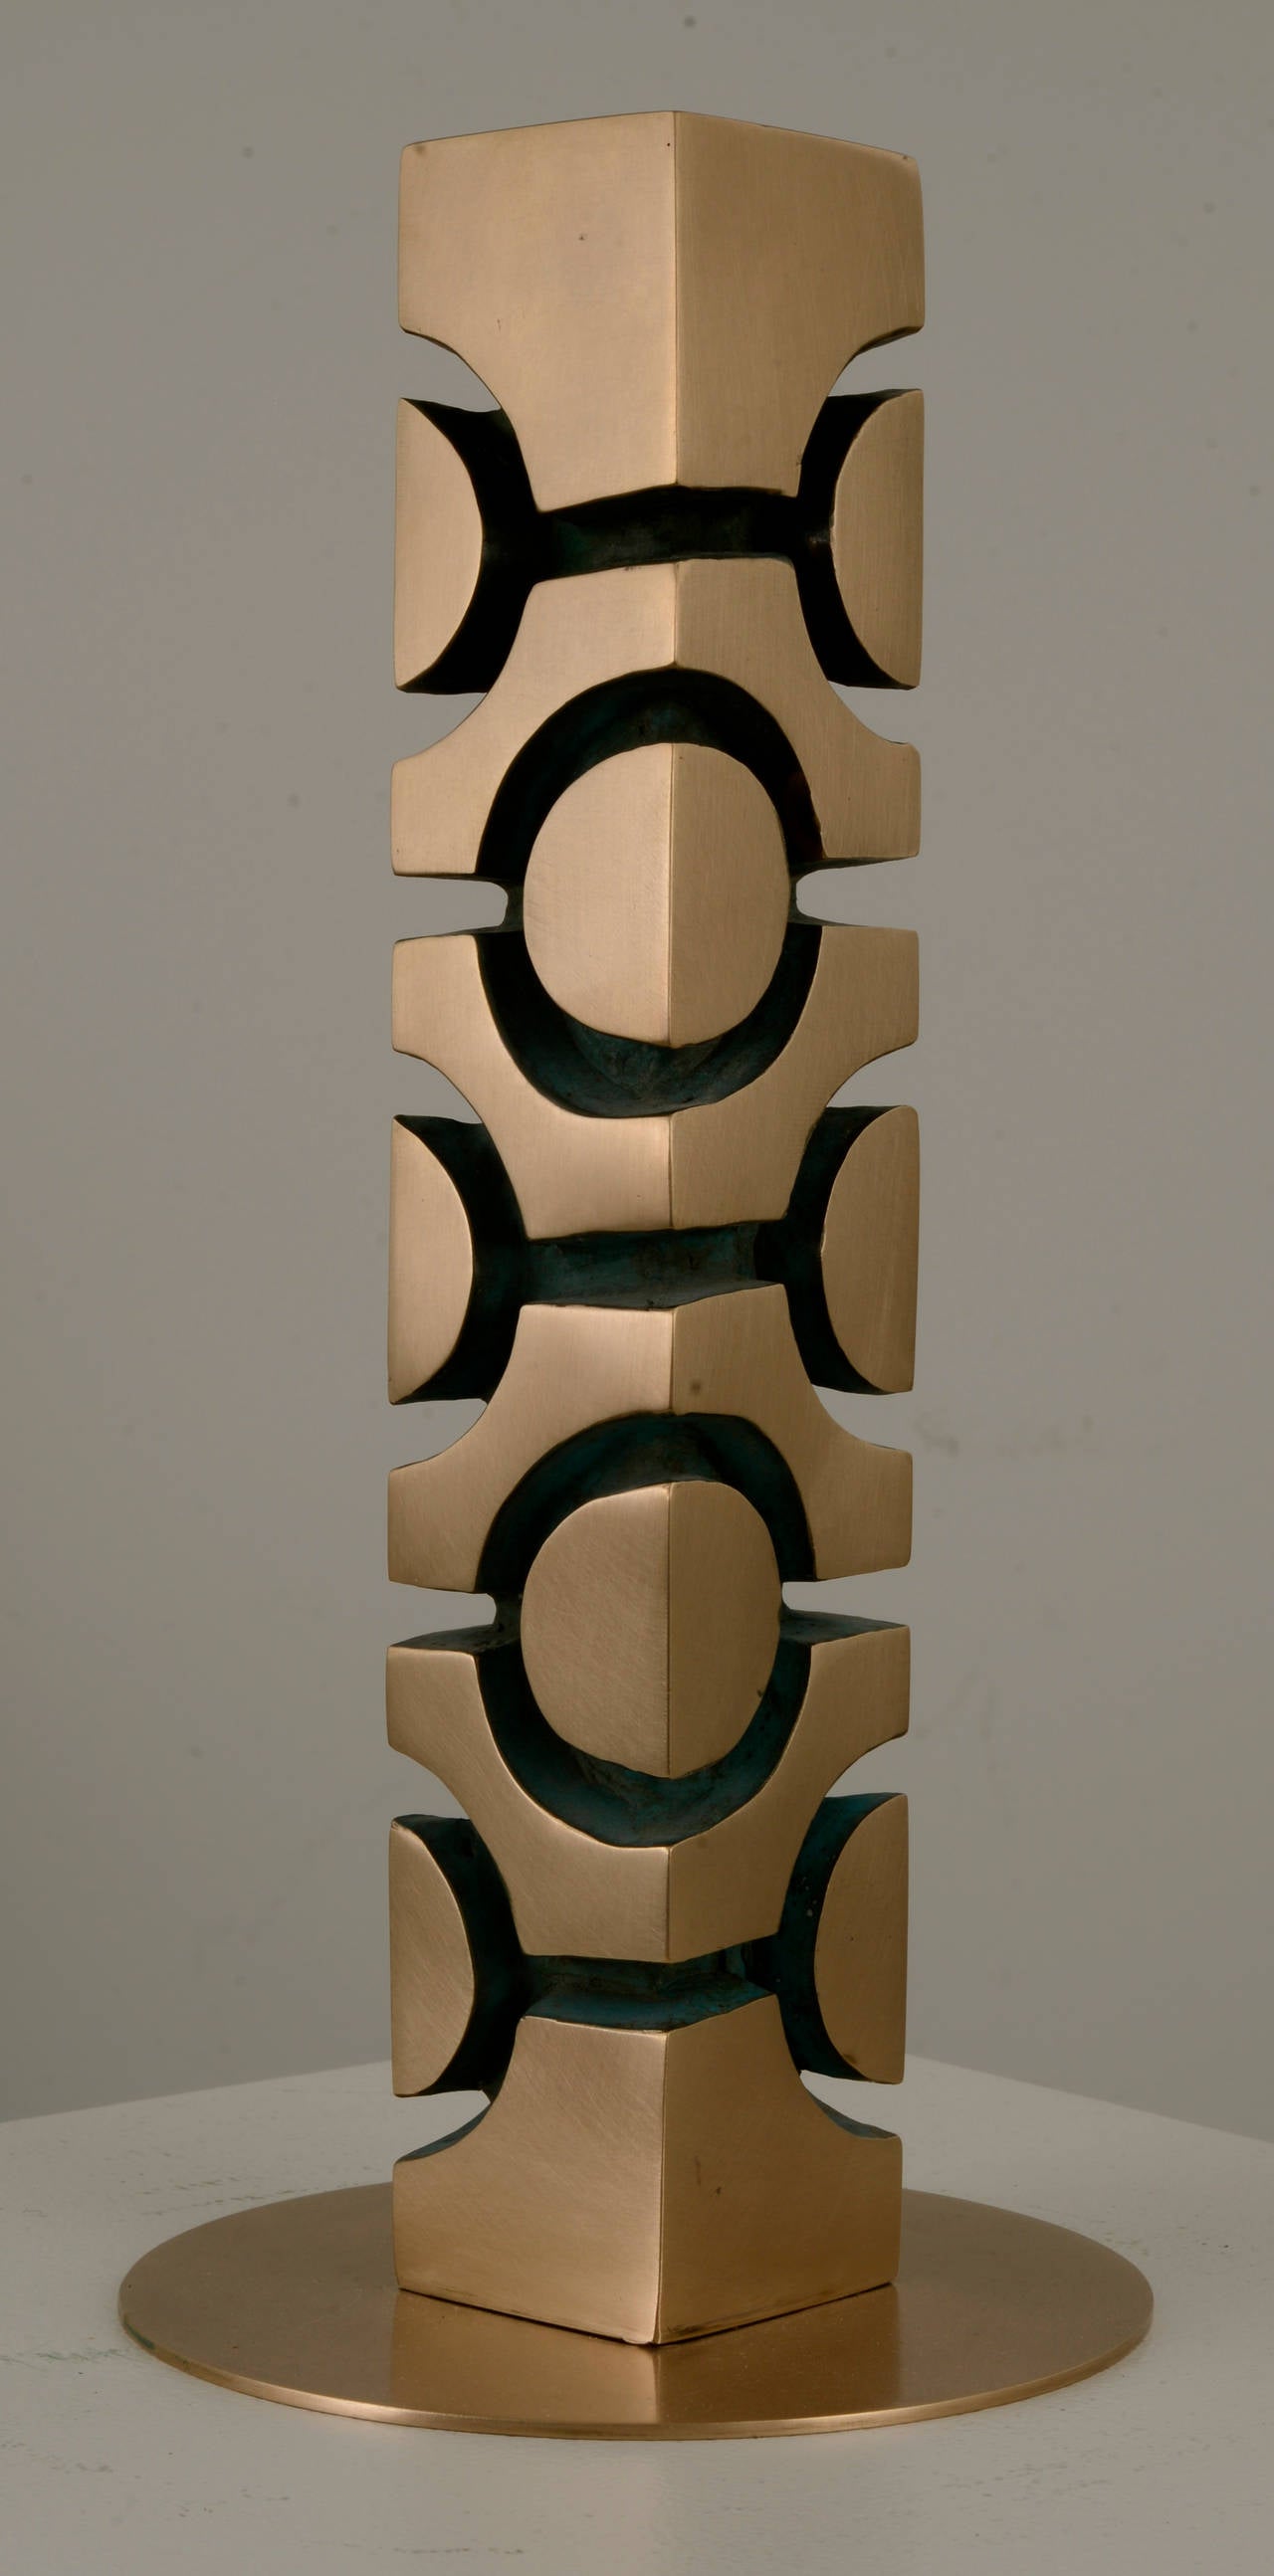 Totem - Endless - Sculpture by Nathaniel Hesse